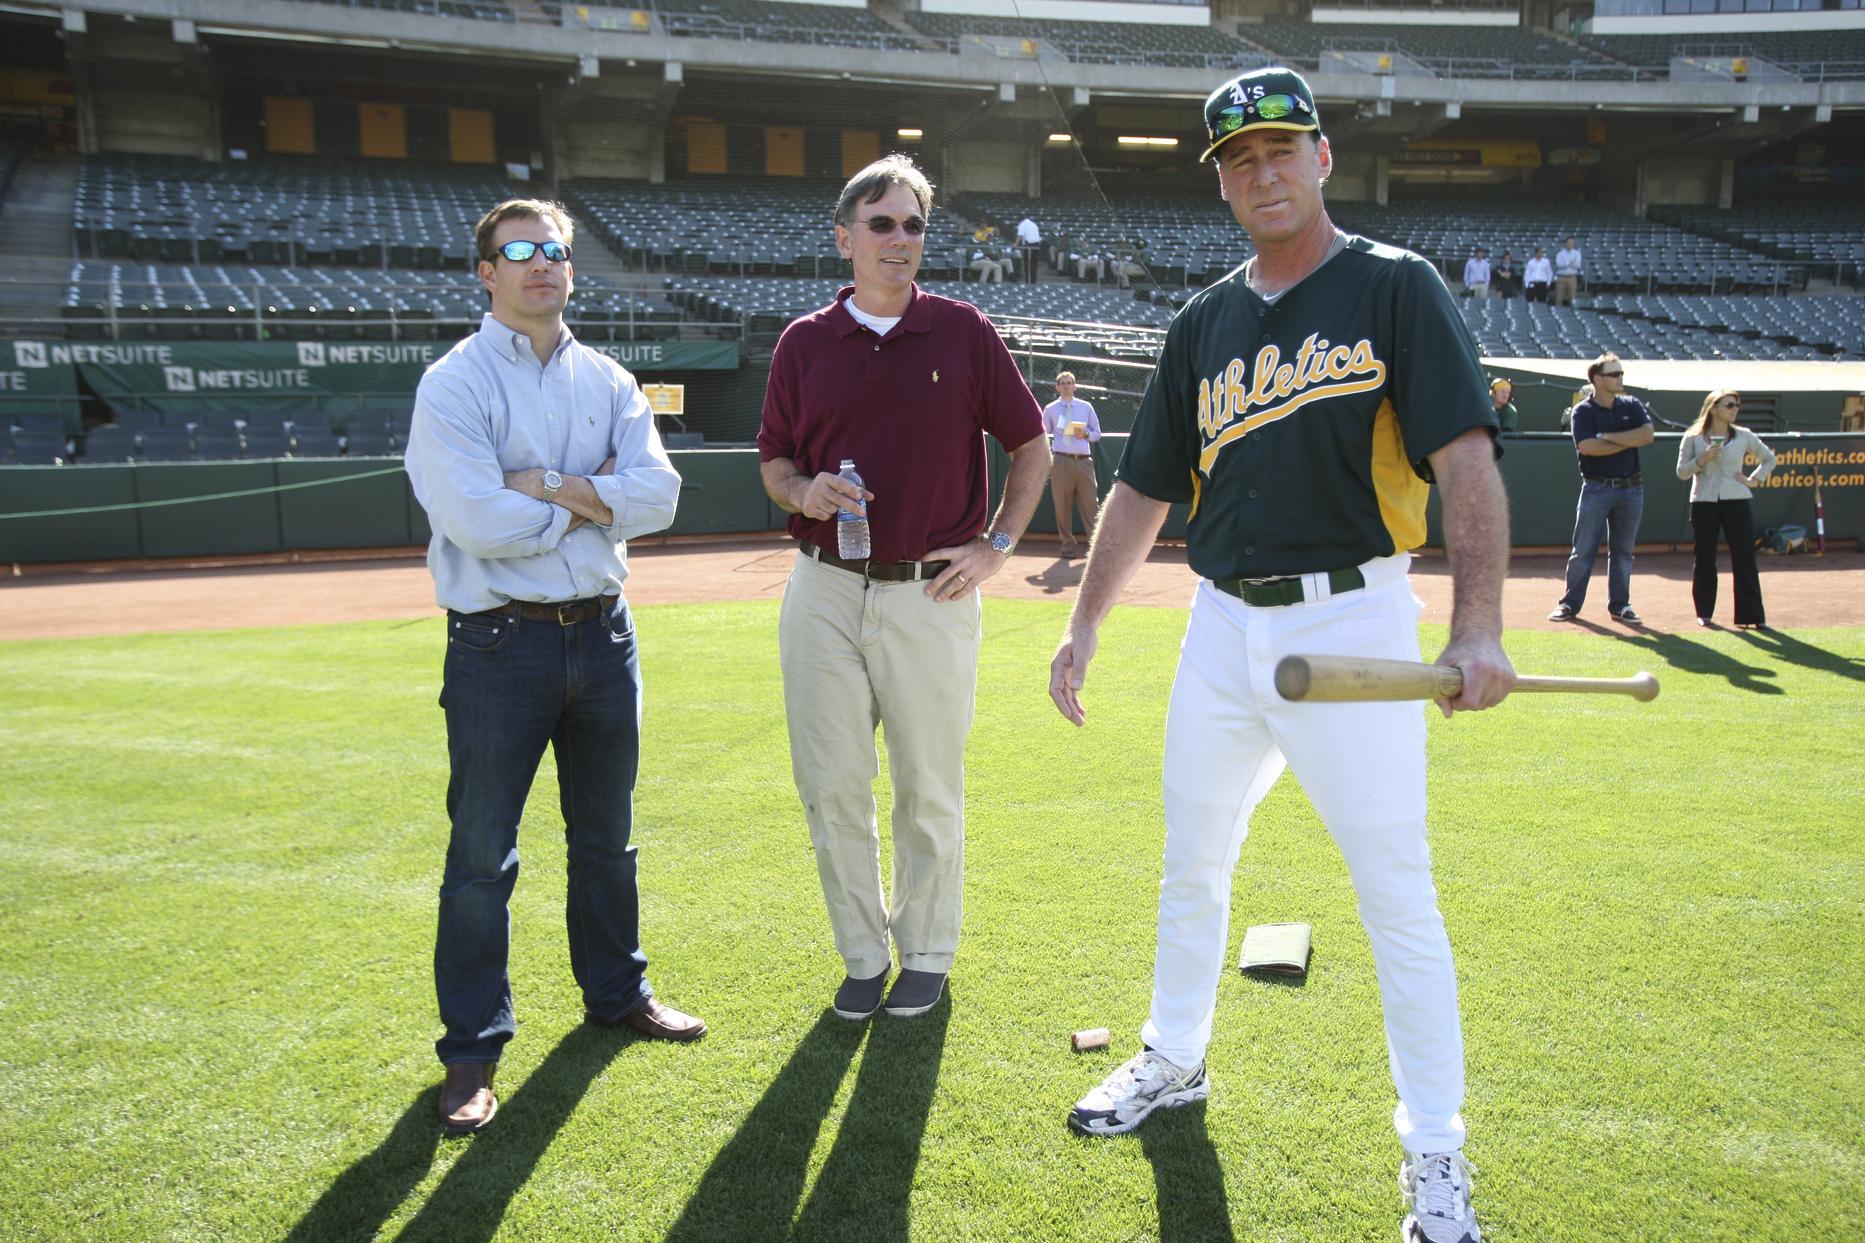 A's GM Billy Beane joins former Yankee in bringing Moneyball to